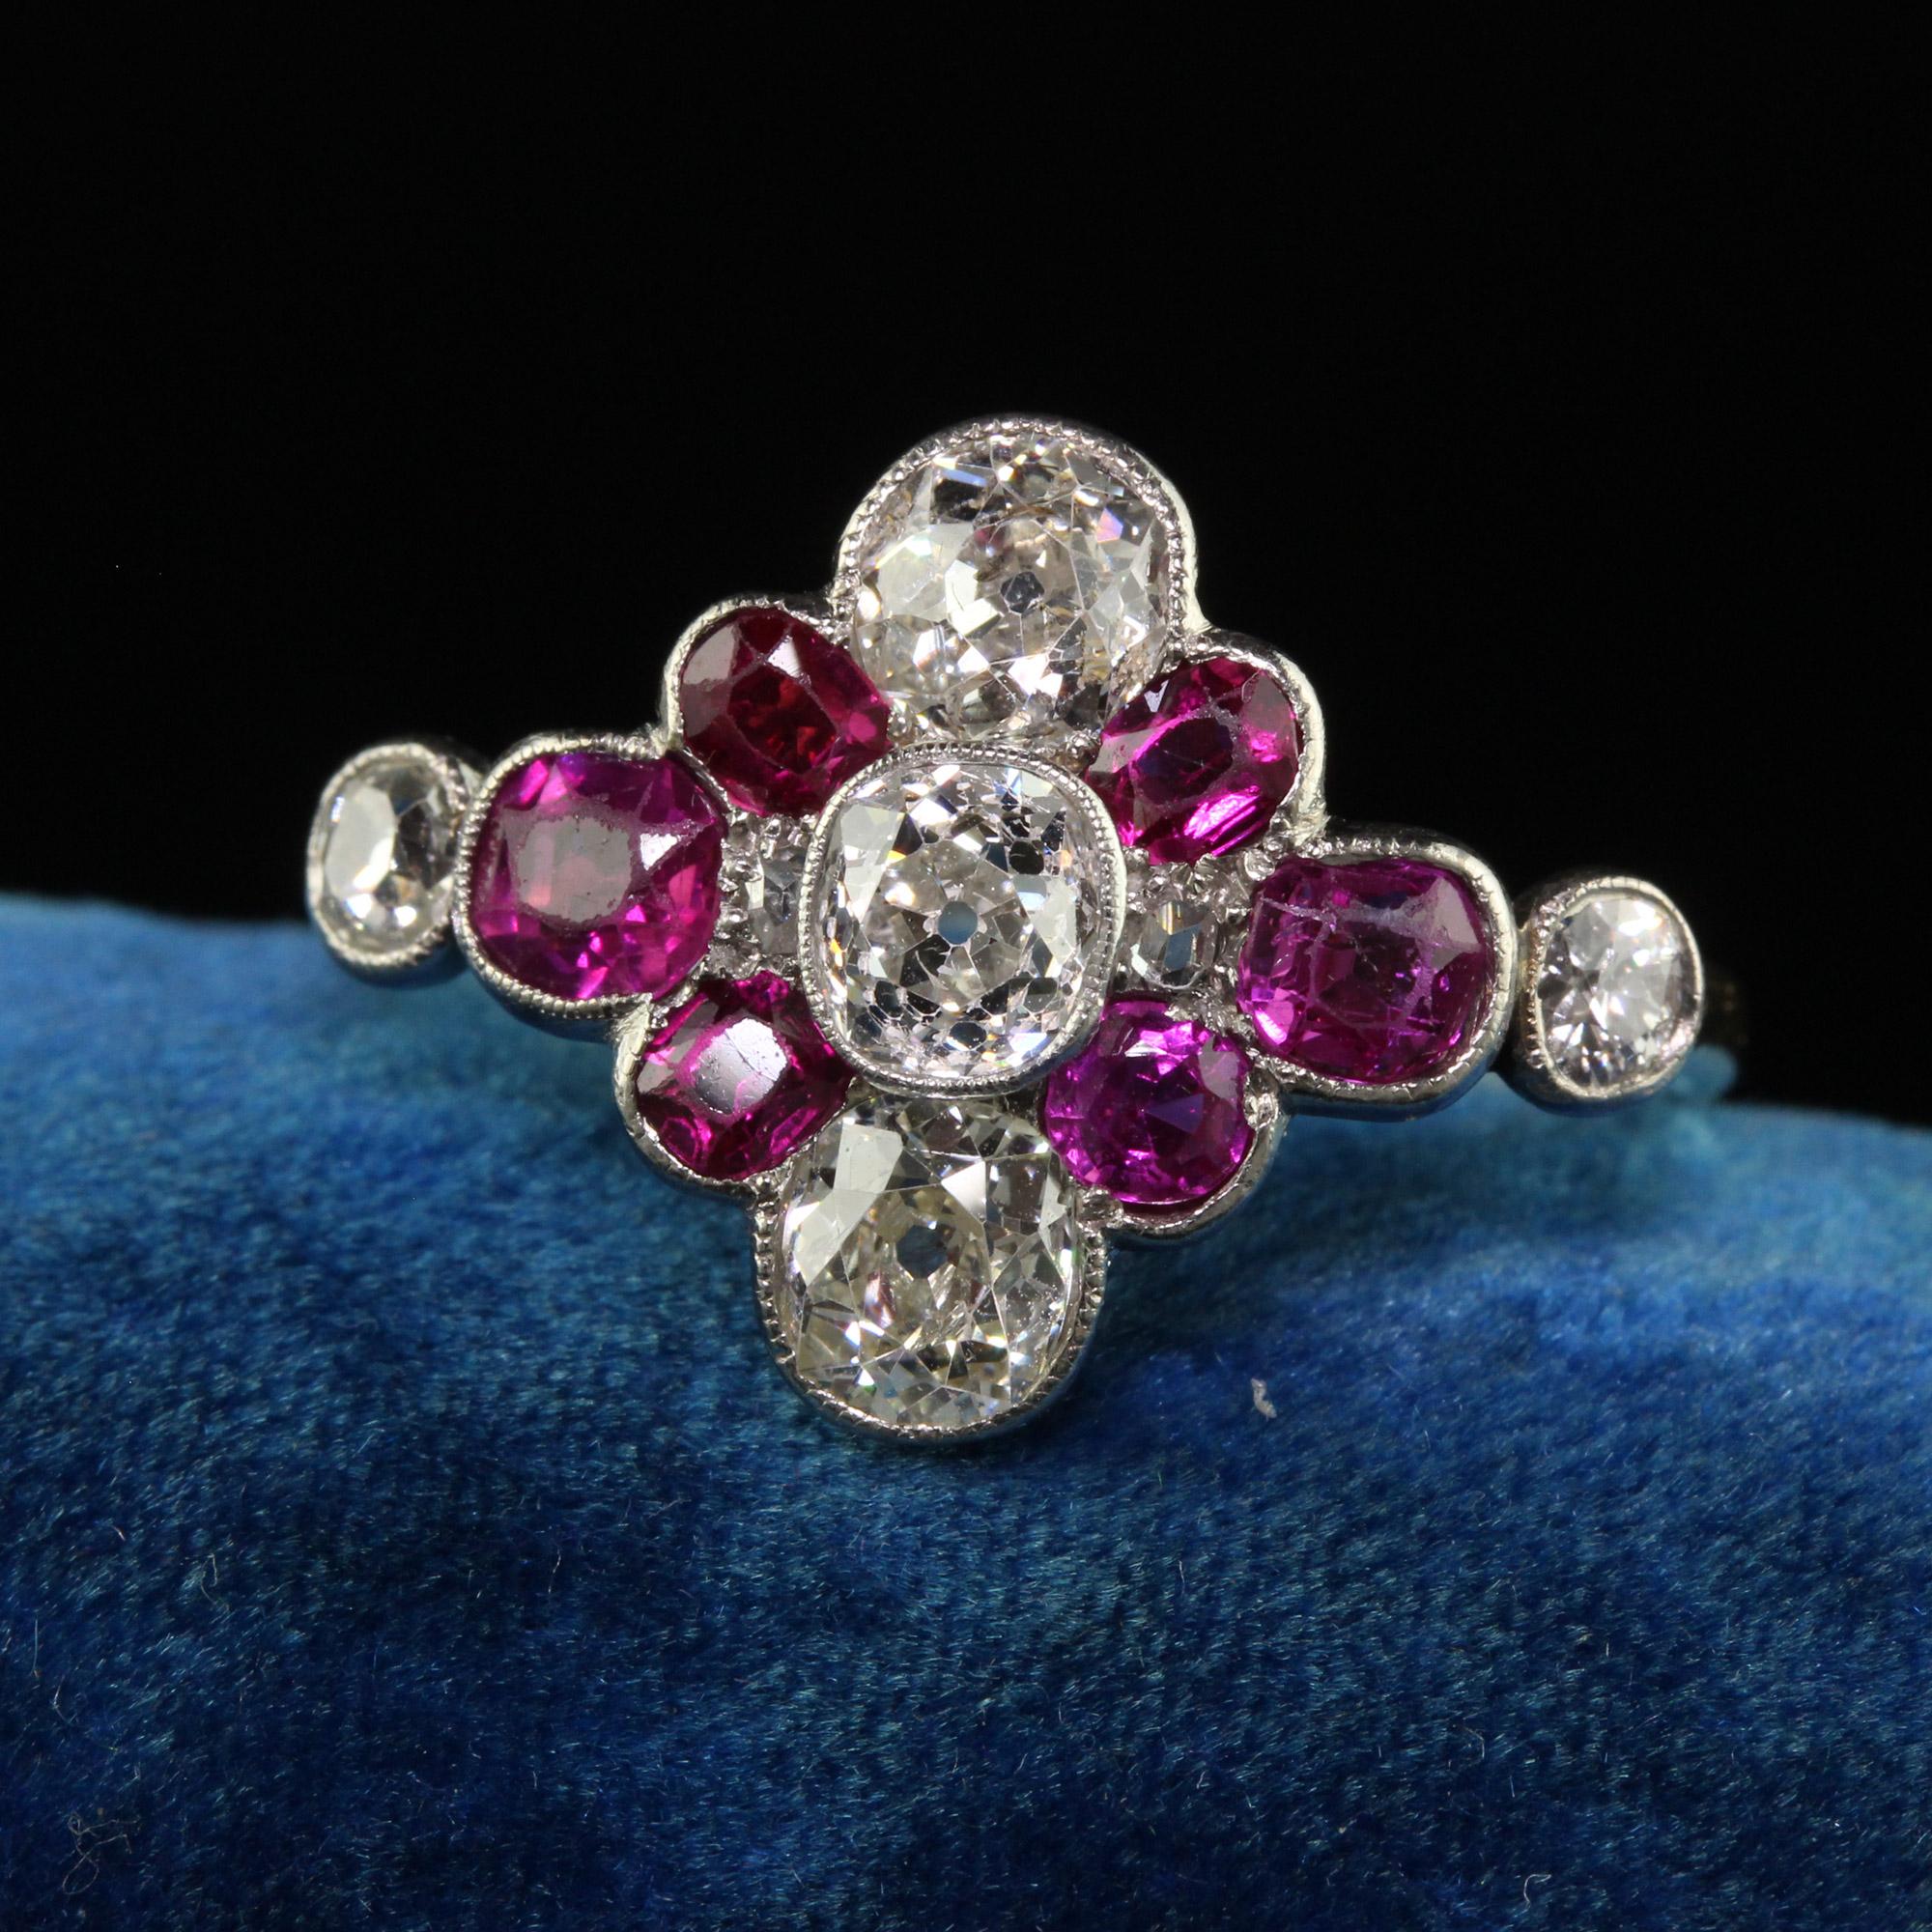 Beautiful Antique Art Deco 18K Yellow Gold Old Mine Diamond and Ruby Floral Ring. This incredible Art Deco ring is crafted in 18k yellow and white gold. The center holds three large old mine cut diamonds and has three natural rubies flare outward.